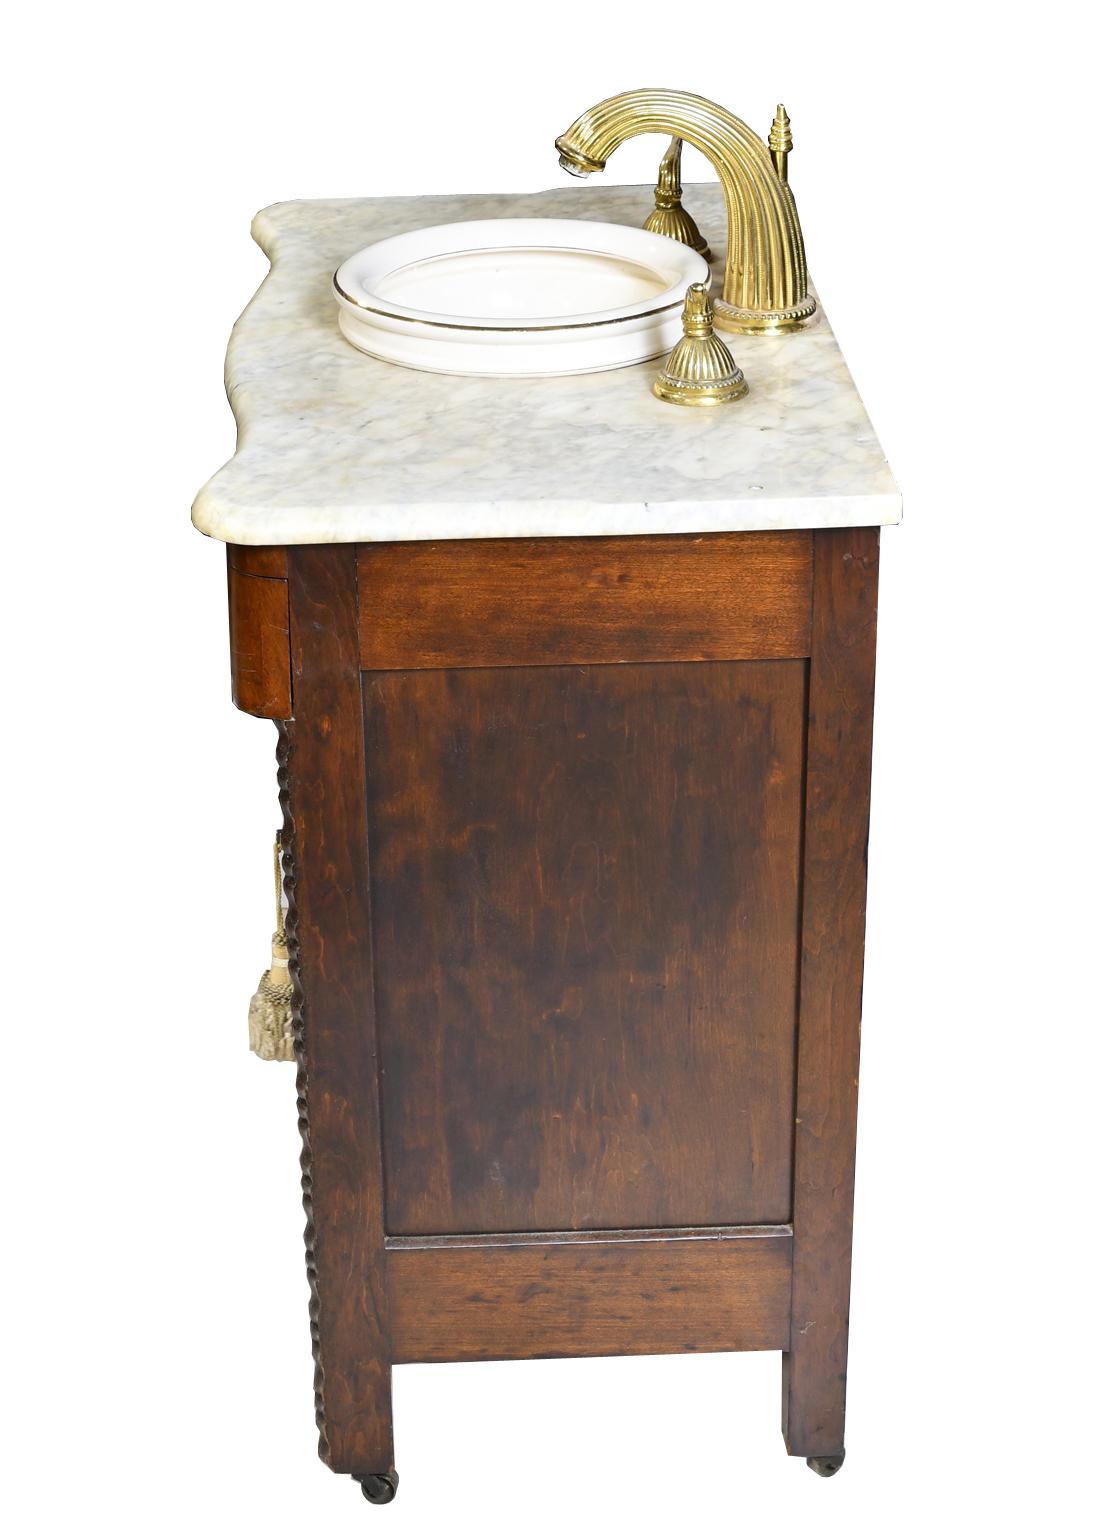 American Antique Victorian Walnut Cabinet w/ White Marble Top Adapted with Sink & Faucet